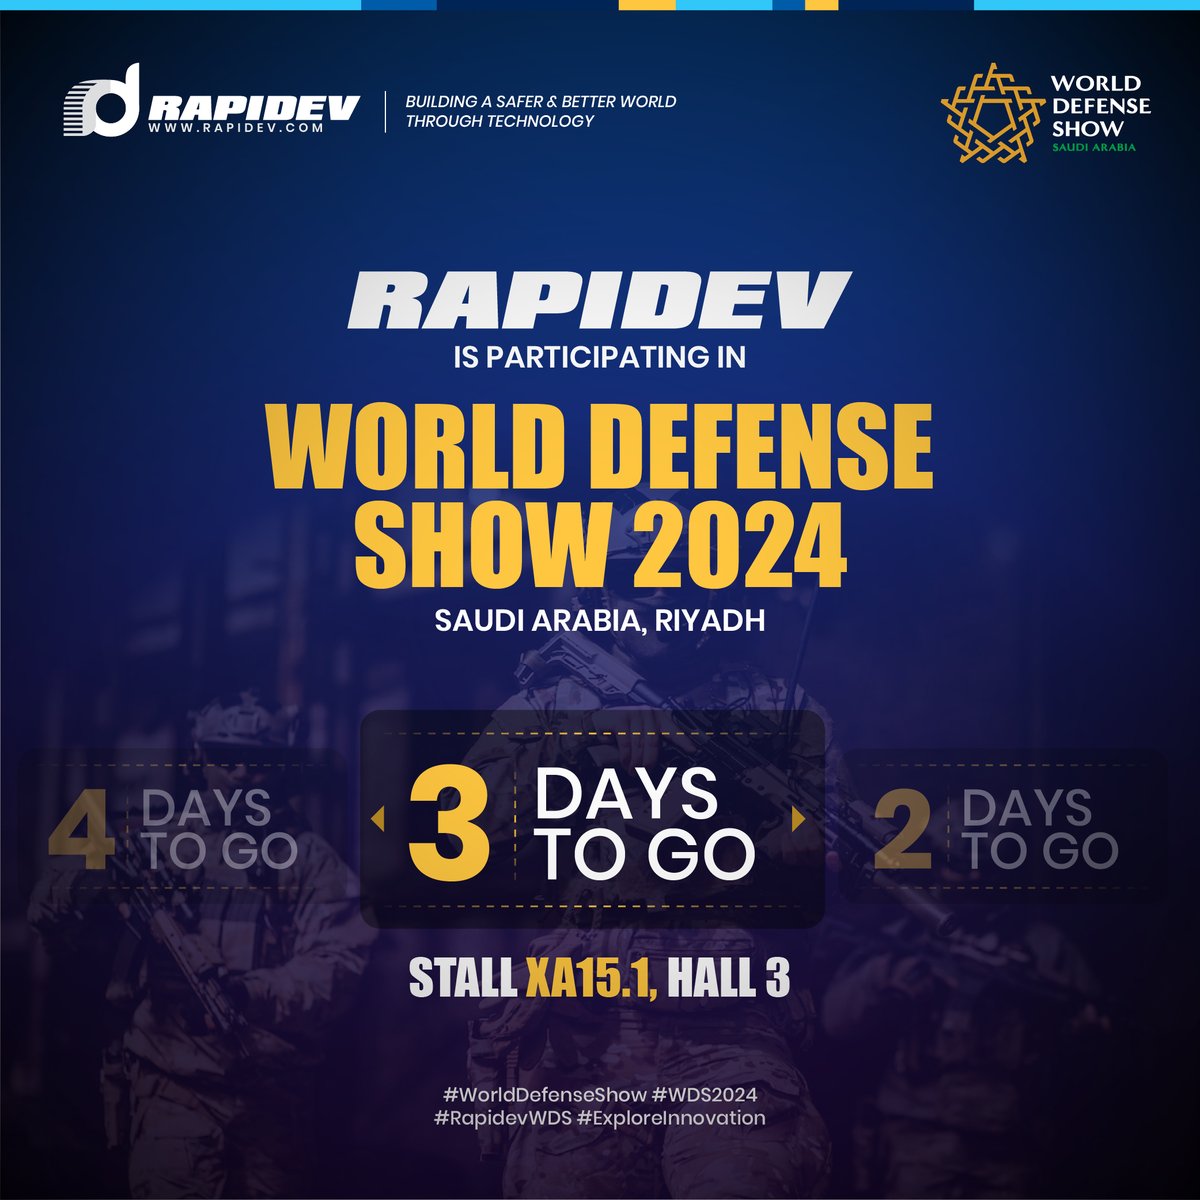 Only 3 days remain until Rapidev emerges in the spotlight at the World Defense Show! Prepare for innovation at its finest. #Security #worlddefenseworld #WDS2024 #innovation